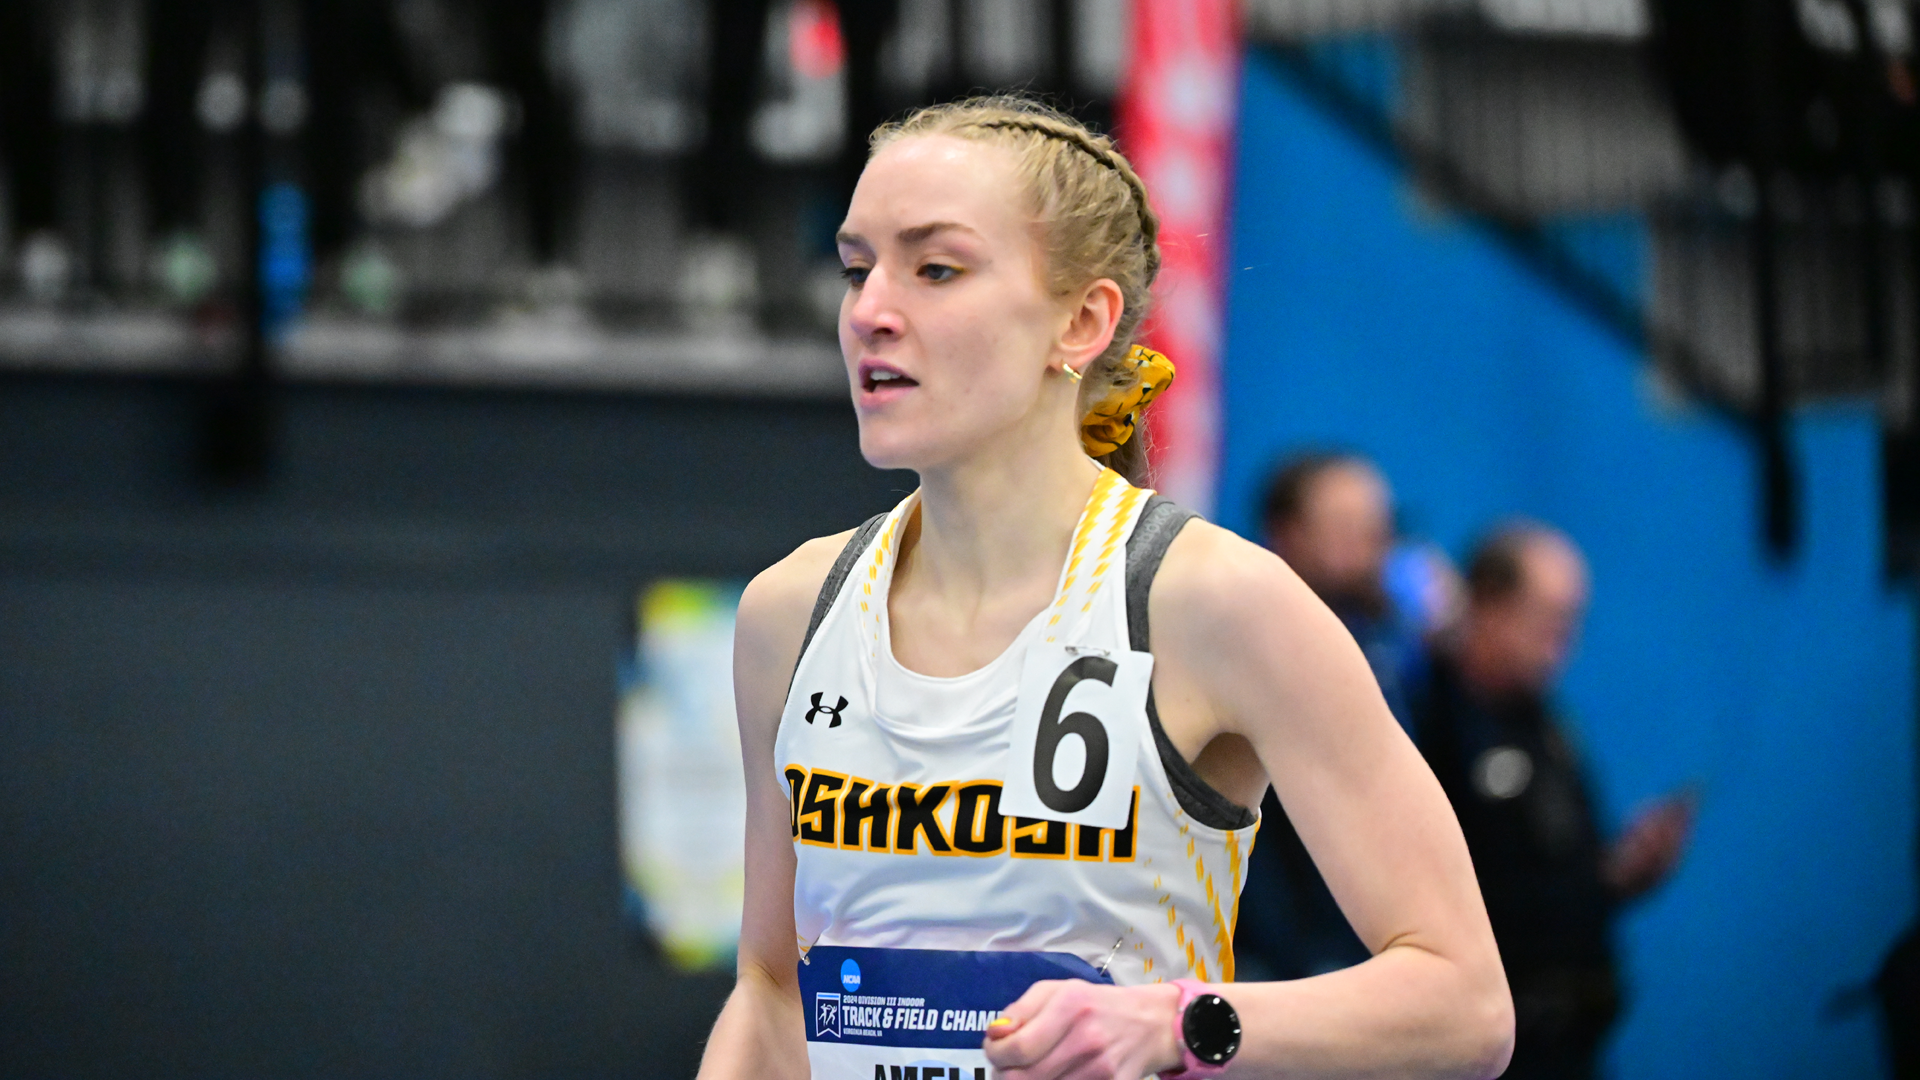 Amelia Lehman captured her second indoor mile run All-America nod on Saturday. Photo Credit: Keith Lucas, Sideline Media Productions